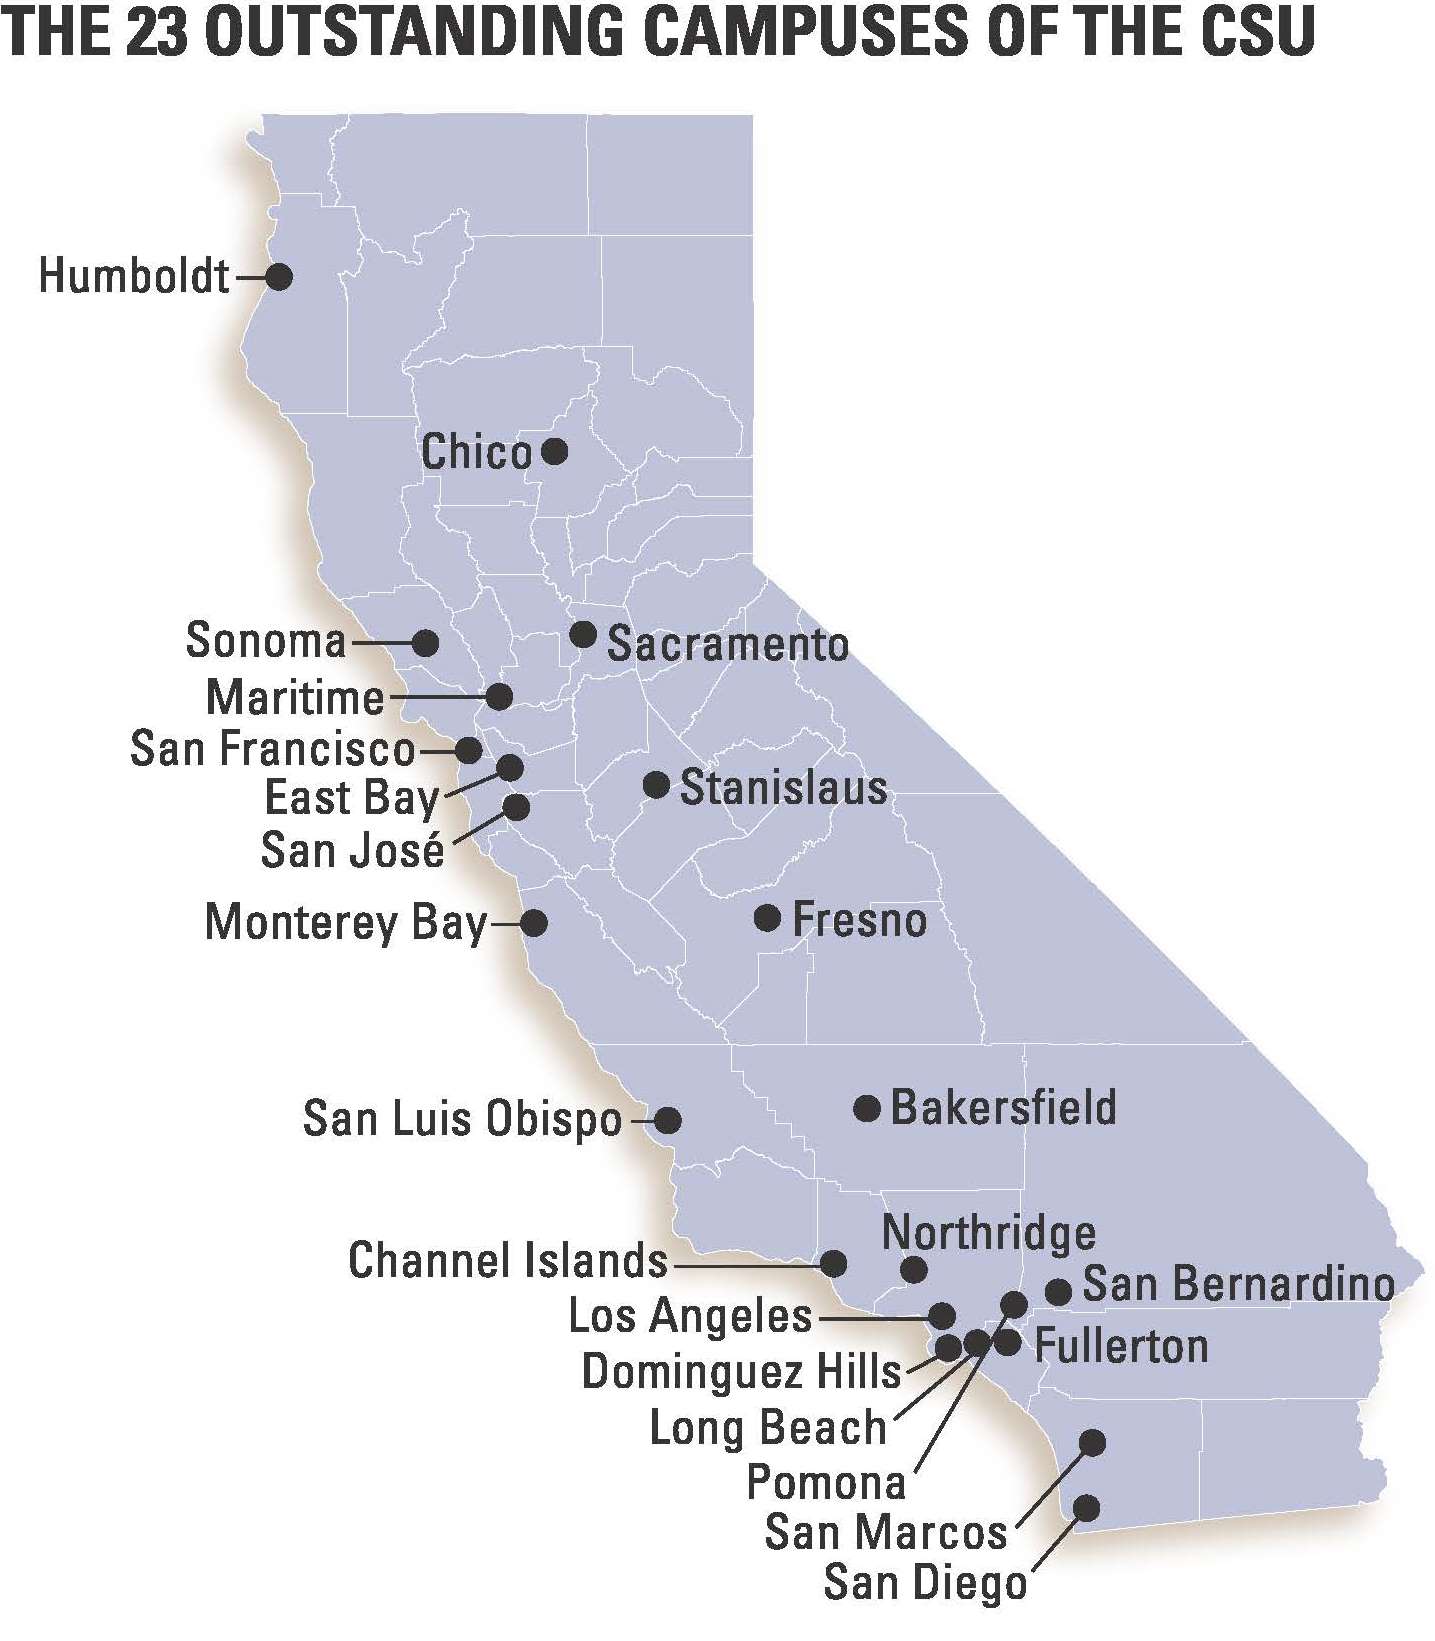 A Map of California Counties and Locations of the 23 CSU Campuses.